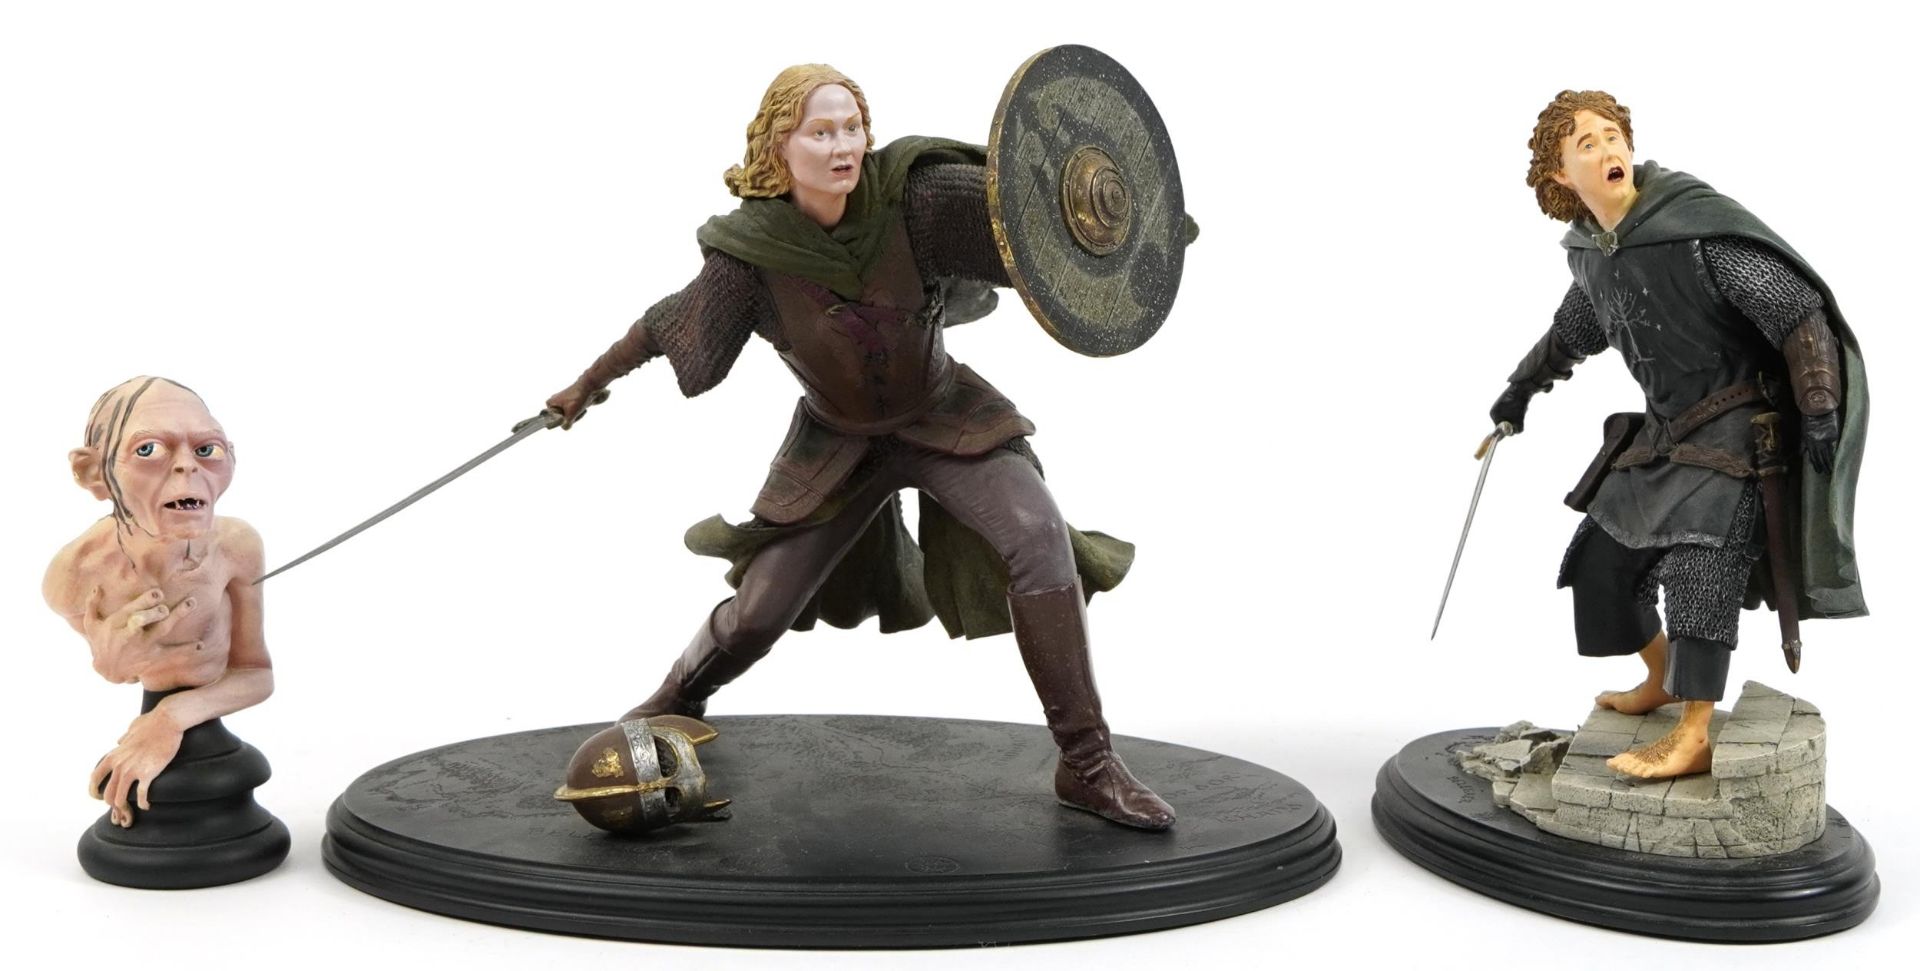 Three Lord of the Rings, The Return of the King Sideshow Weta figures comprising Miranda Otto as